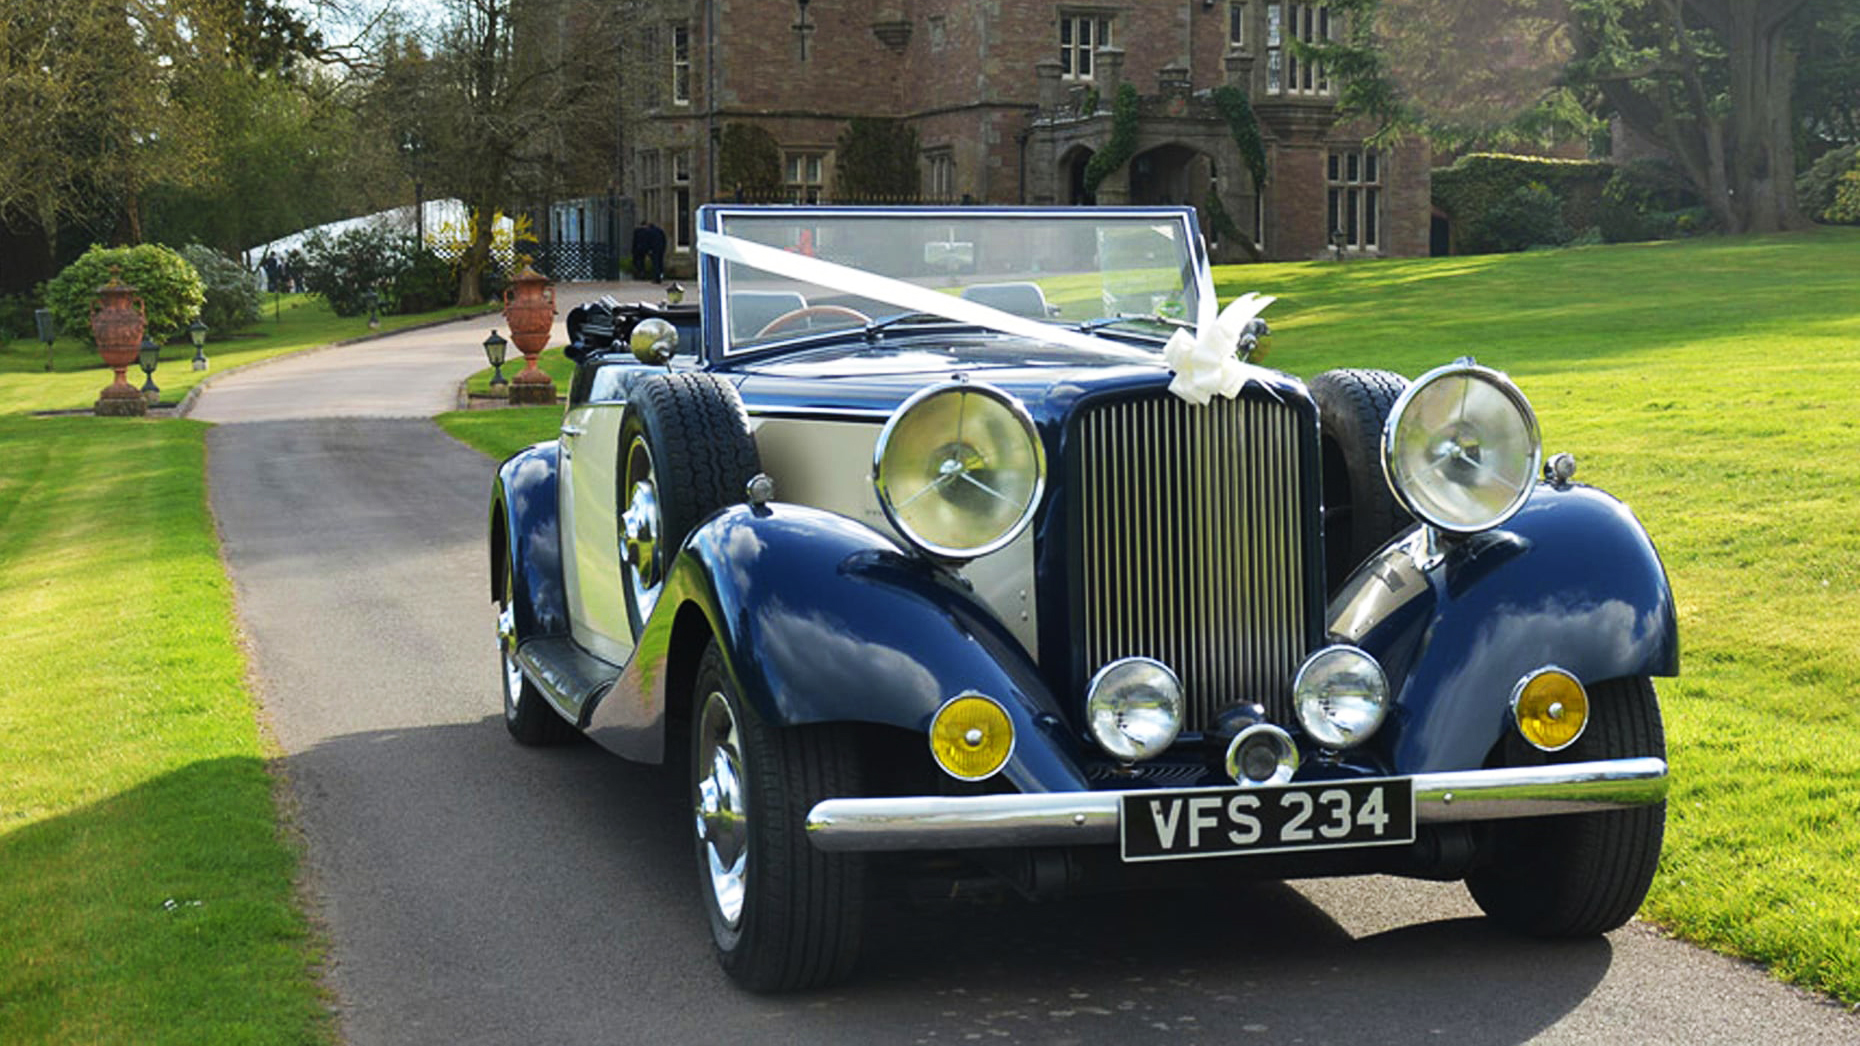 Blue and Ivory vintage Jaguar Drophead on the driveway of a local wedding venue inEarl Shilton.